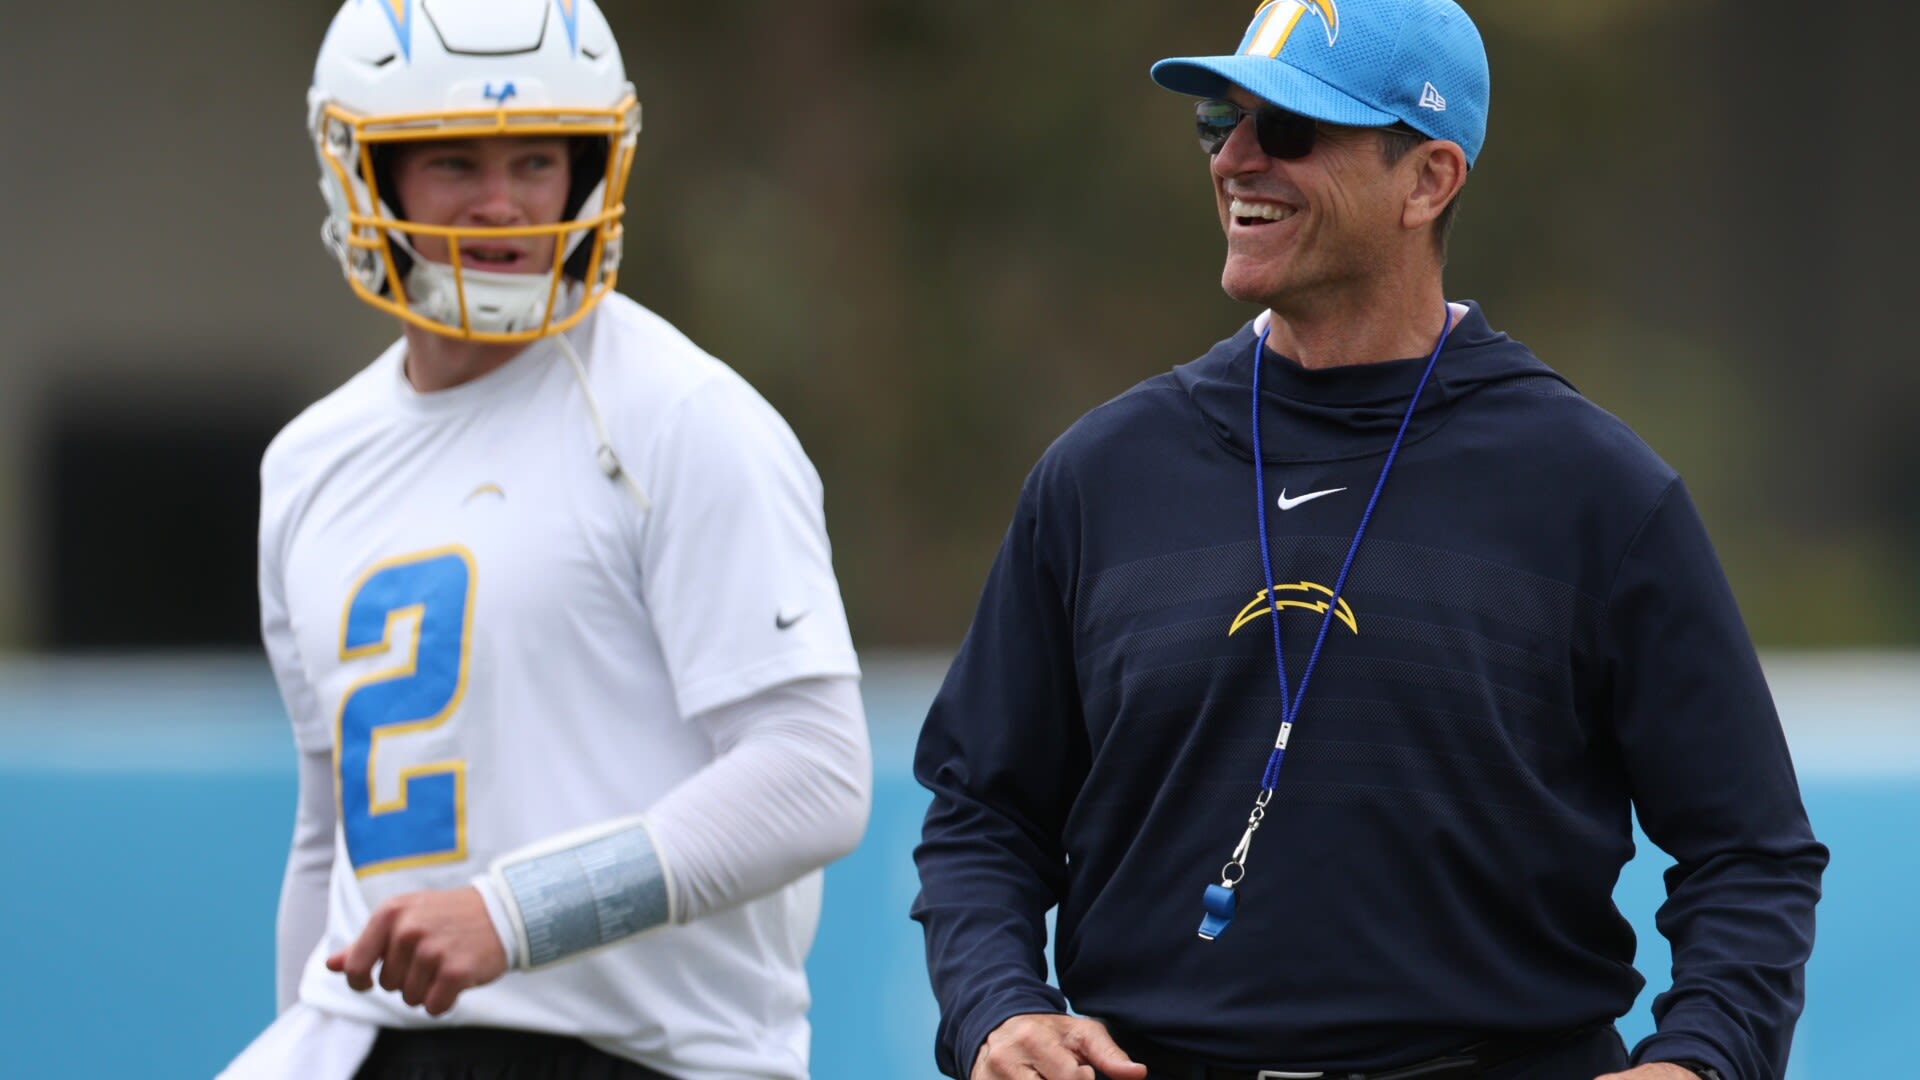 Jim Harbaugh: Chargers have "an incredible edge" with how hard we work in the offseason